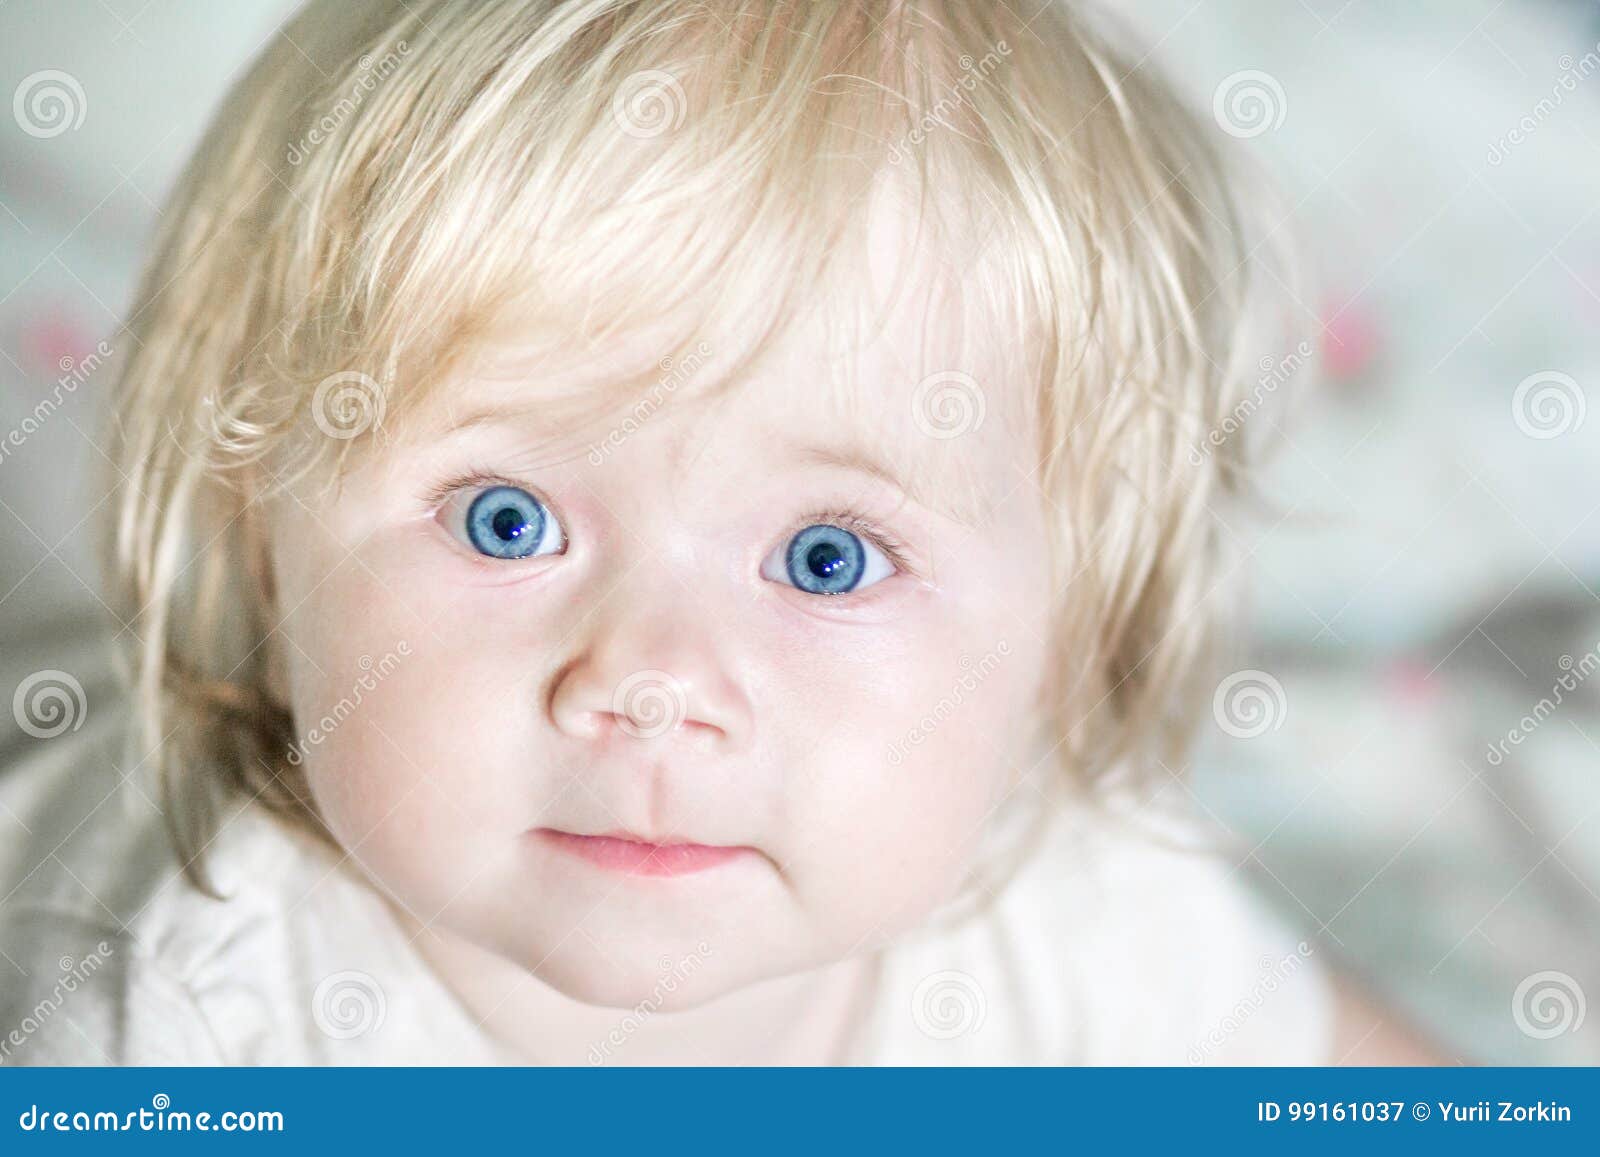 A little cute baby with blue eyes. A child with blue eyes. A bright picture of a girl with blond hair. Care for the child. Happy child smiling. Carefree childhood. Joyful look of the kid.